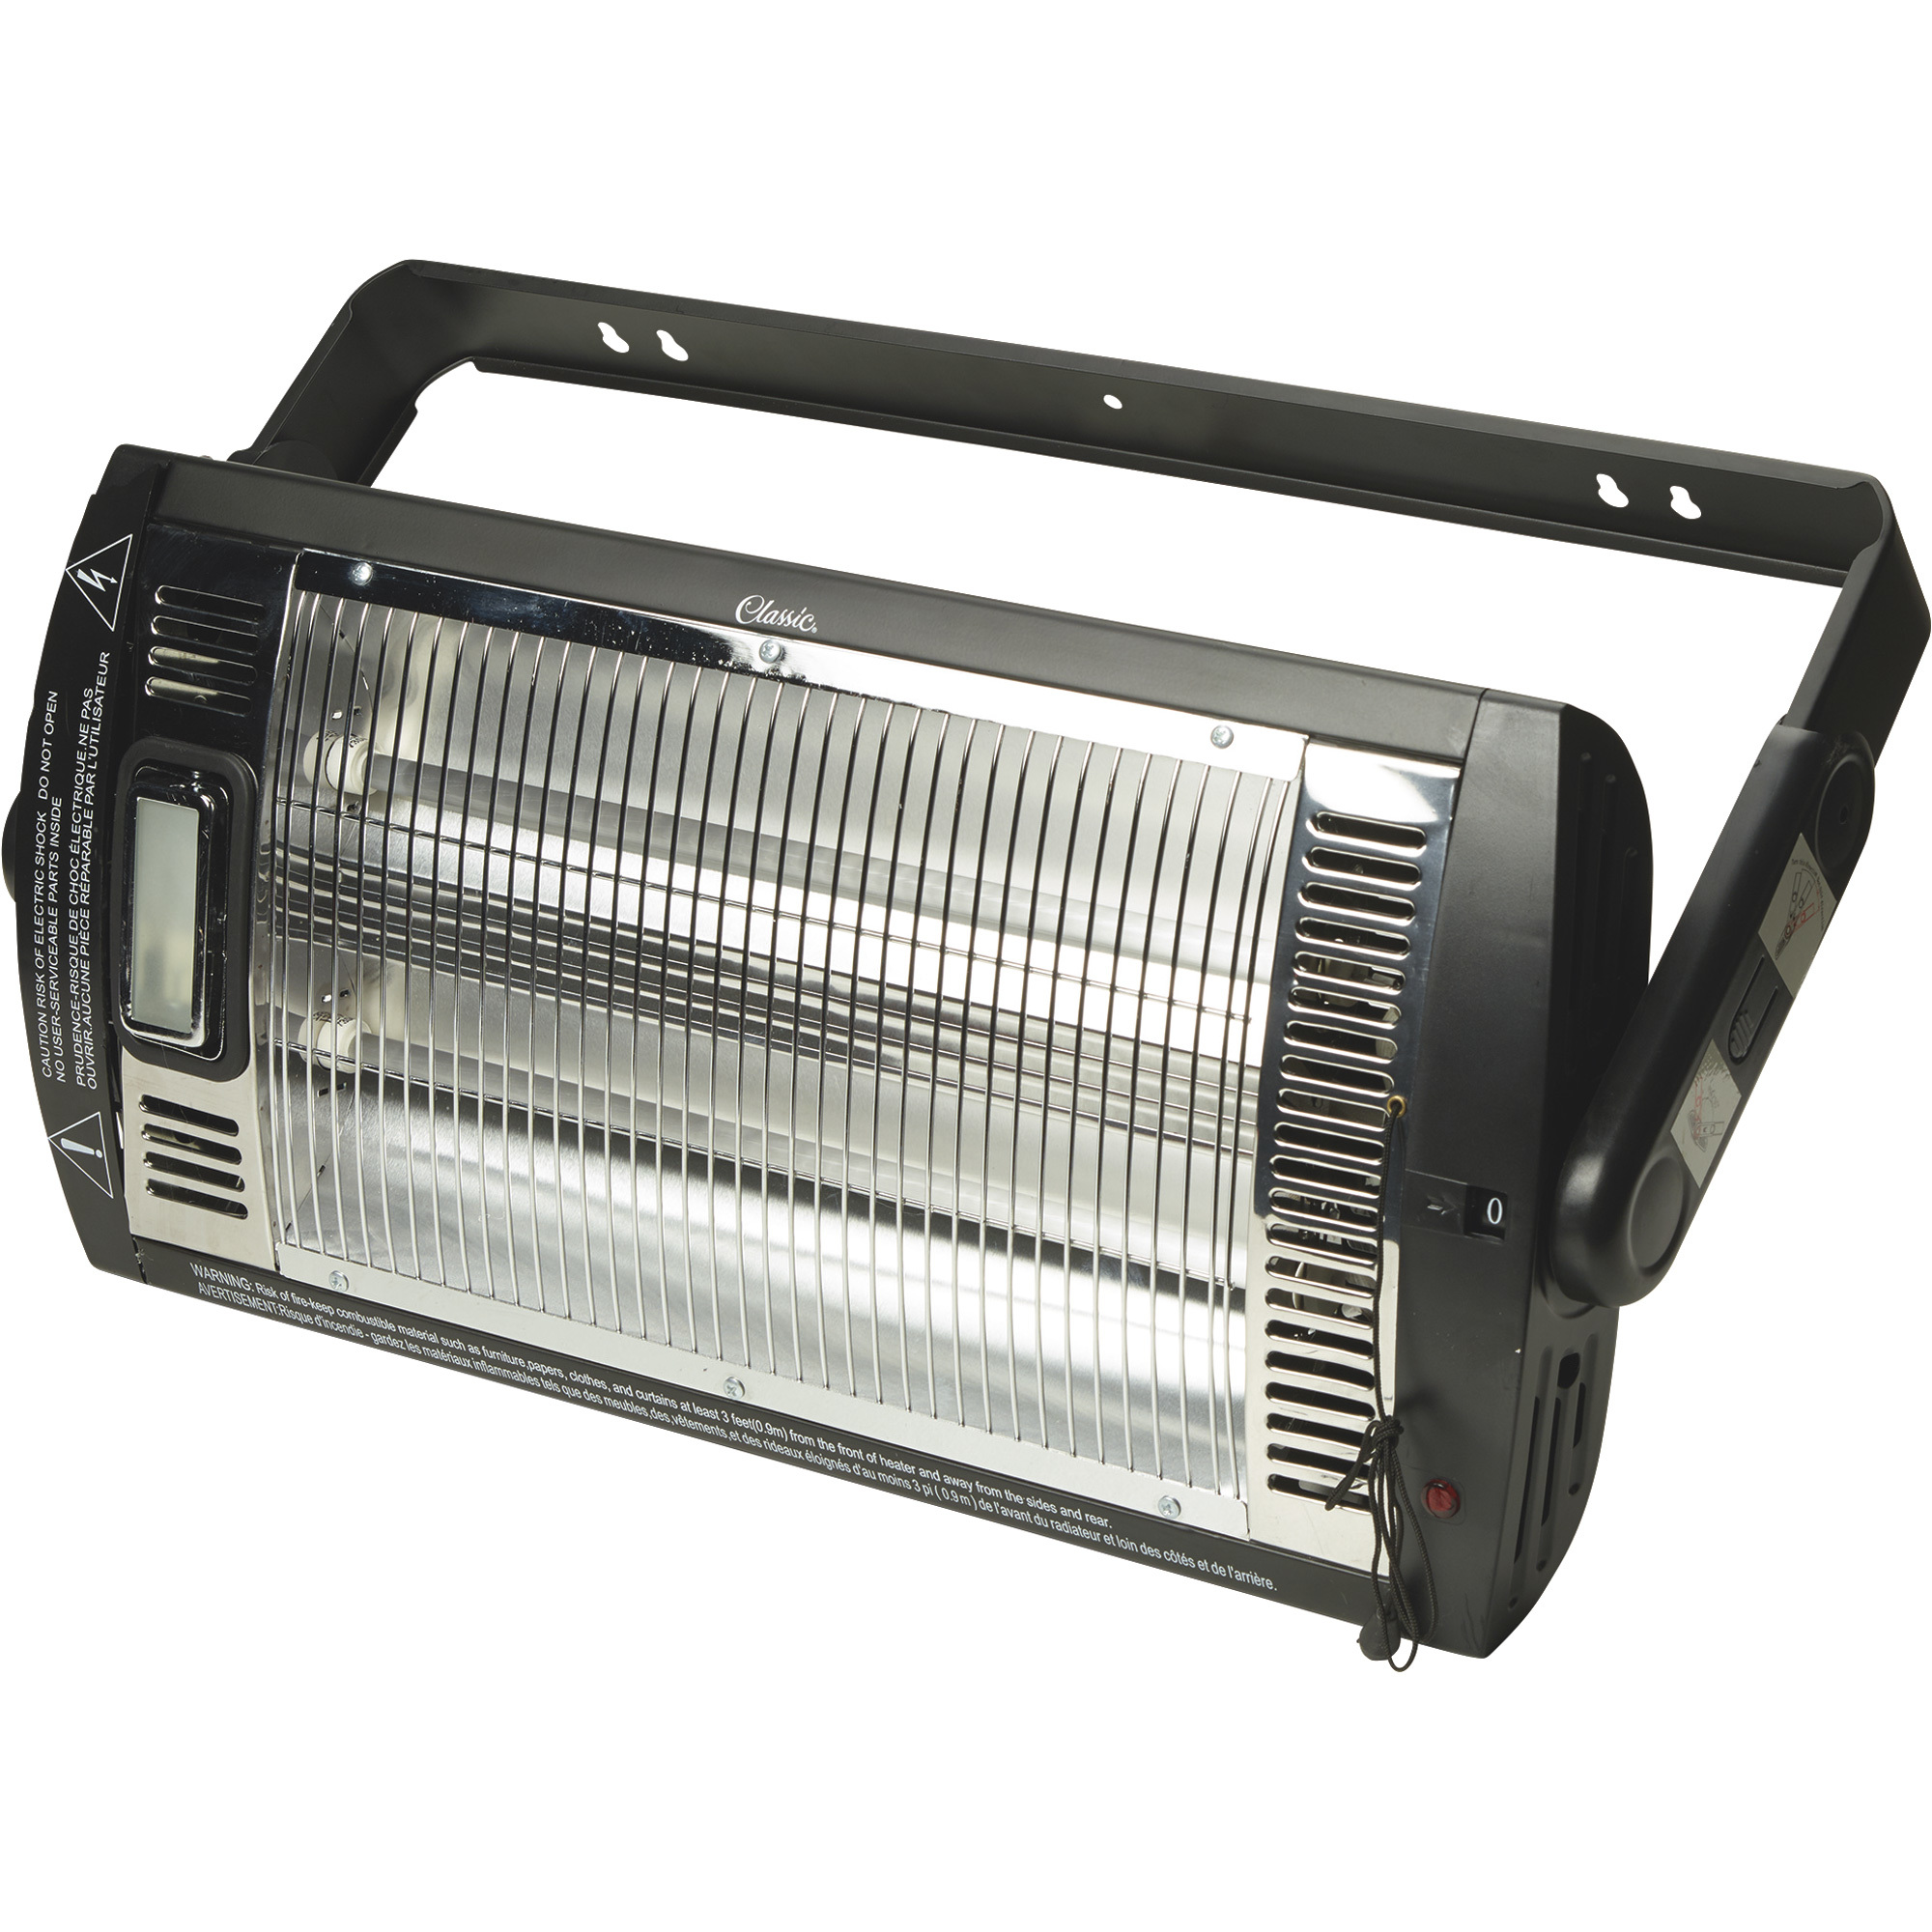 ProFusion Heat Ceiling-Mounted Workshop Heater with Halogen Light â 5,200 BTU, 1,500 Watts, Model HQ1500